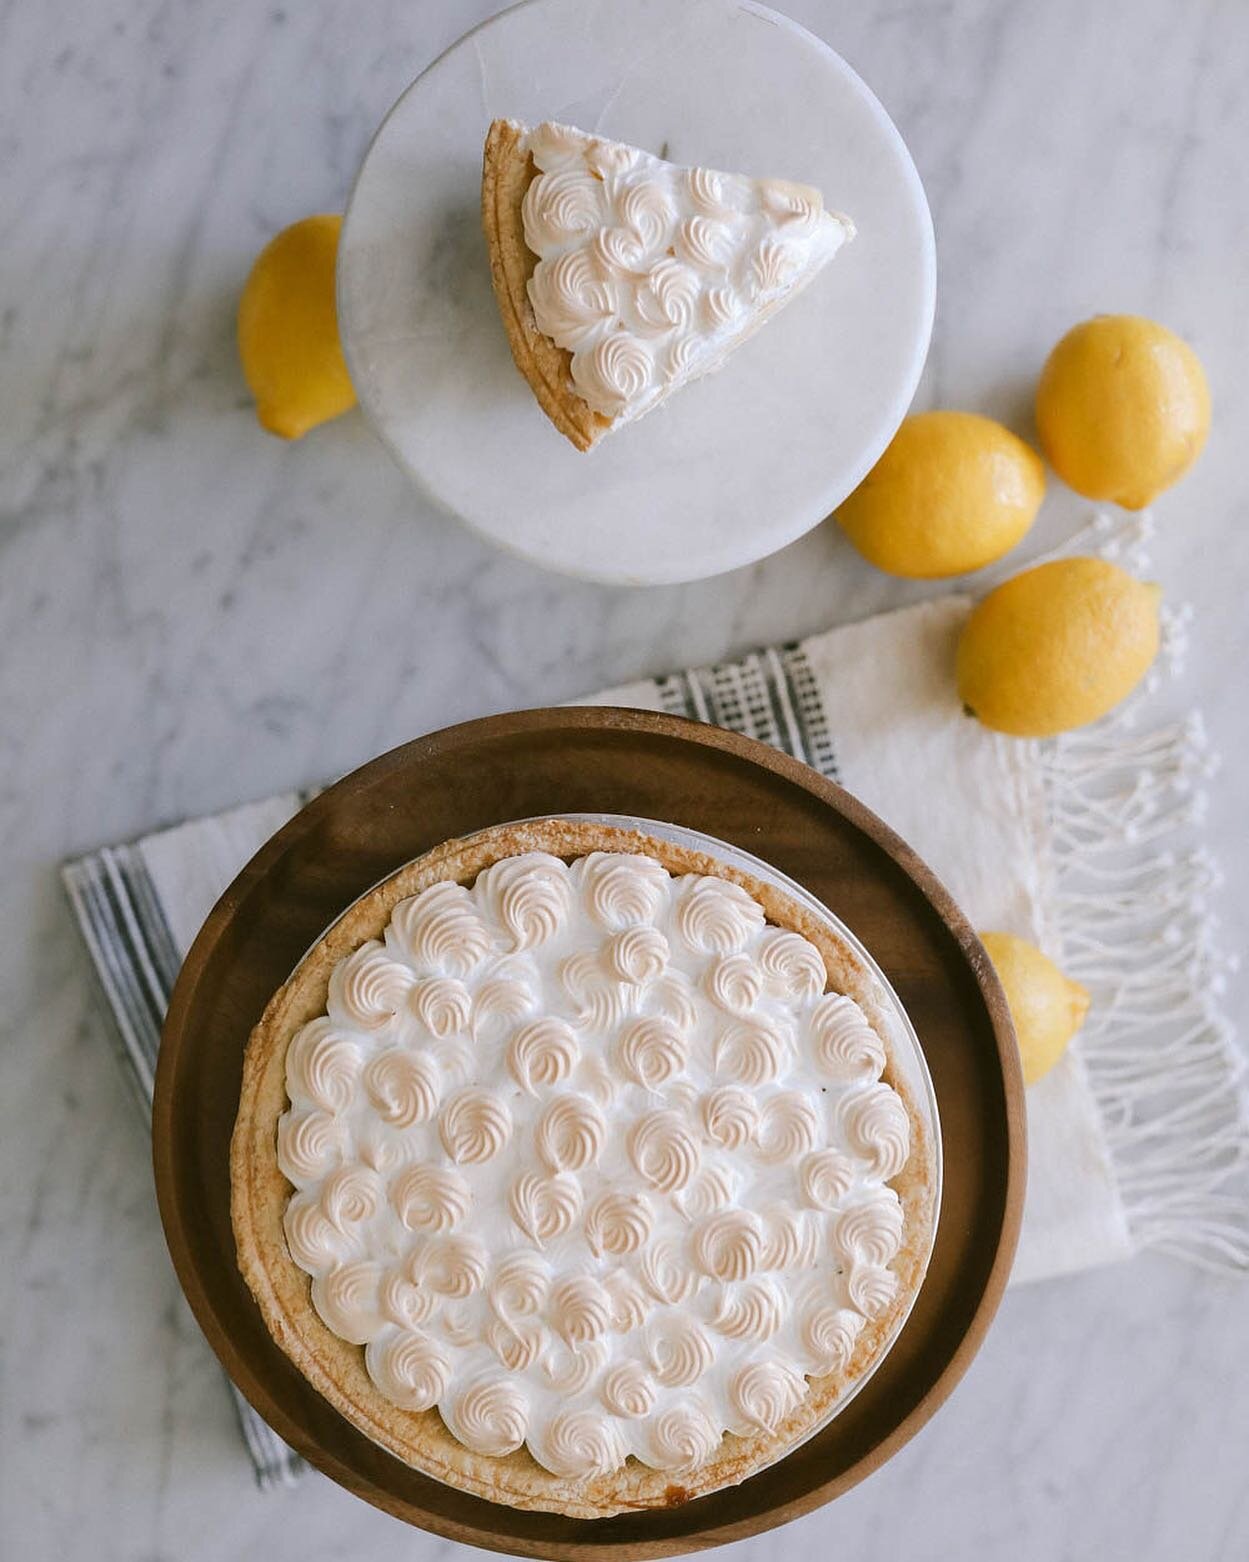 Labor Day and lemon meringue pie, the perfect combination! Made with freshly squeezed lemon juice and vanilla, this pie is guaranteed to sweeten your Labor Day gathering! Come get yours today at @mckeeversmarket in Lenexa! 🍋